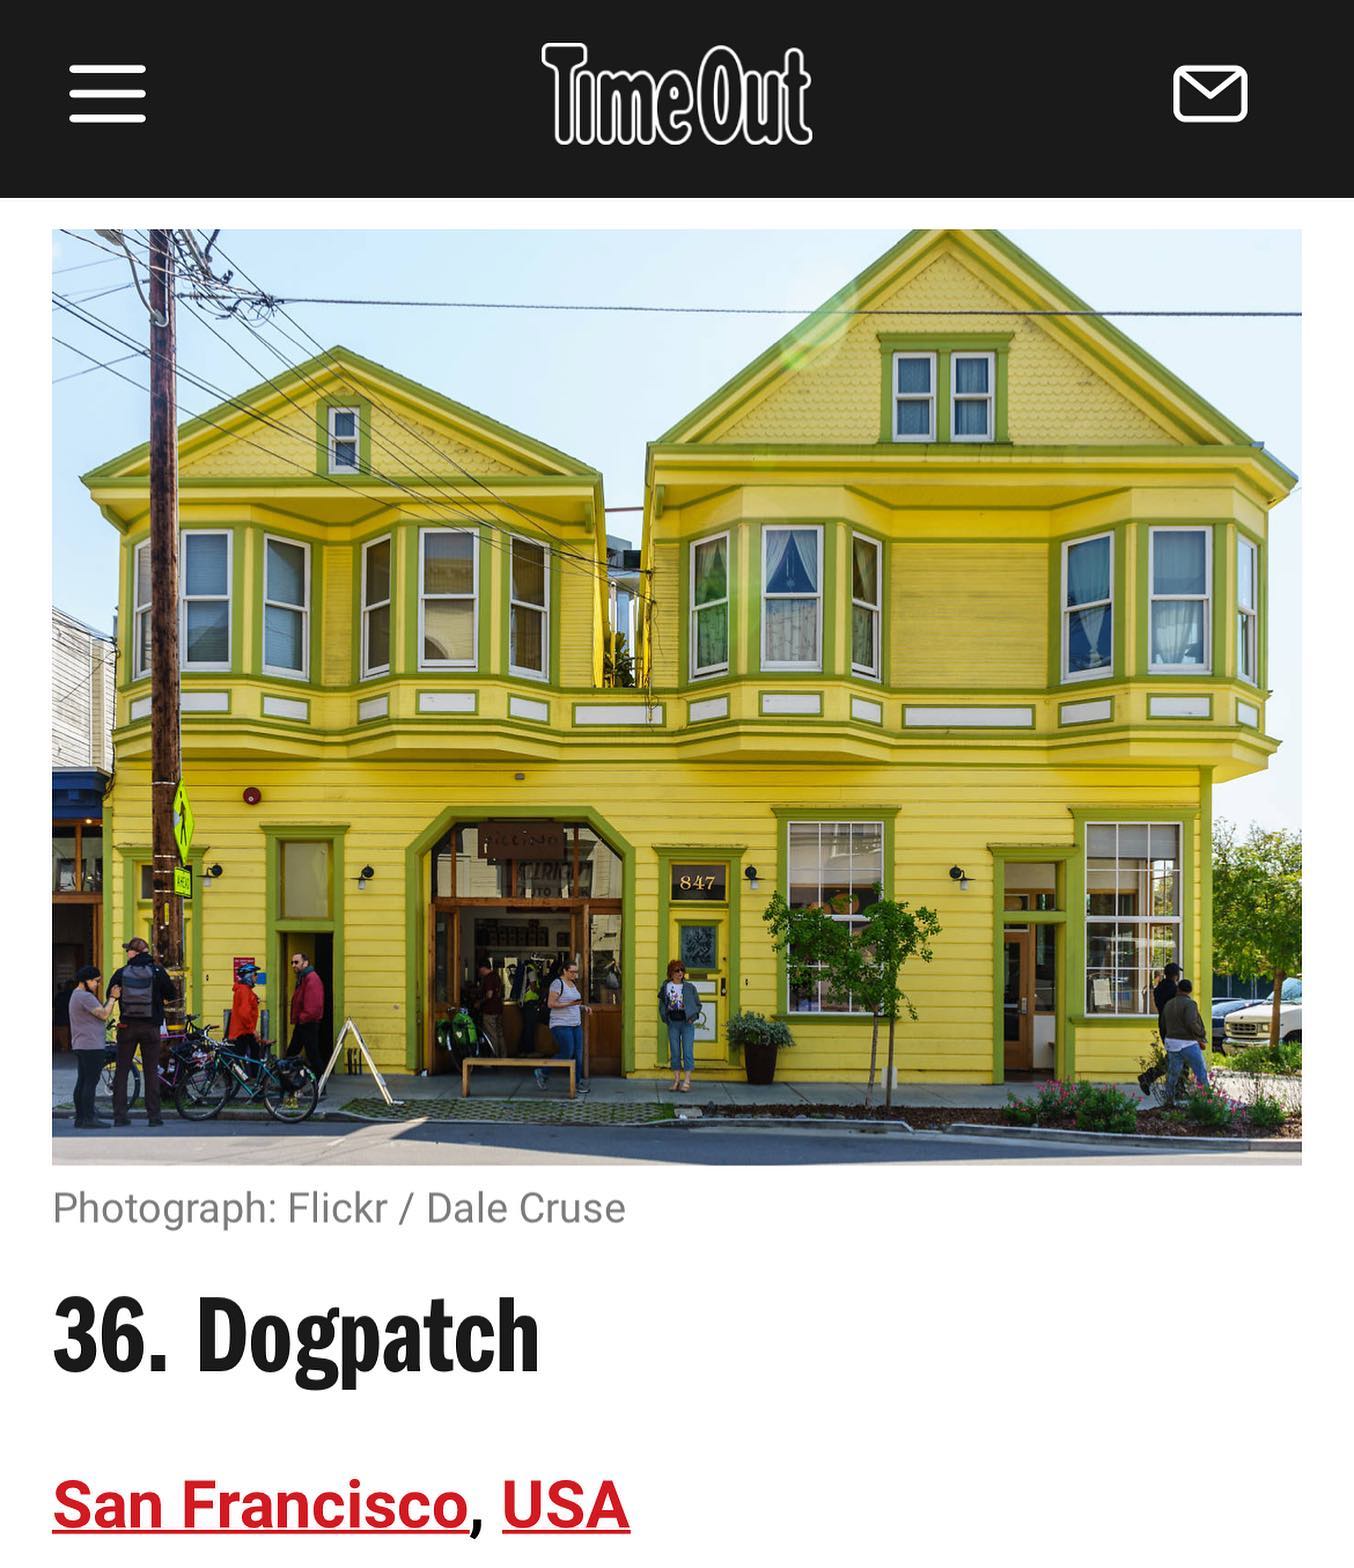 TimeOut magazine named Dogpatch (home to Hands On Gourment) one of the “coolest neighborhoods in the world.” Coincidence? We think not!